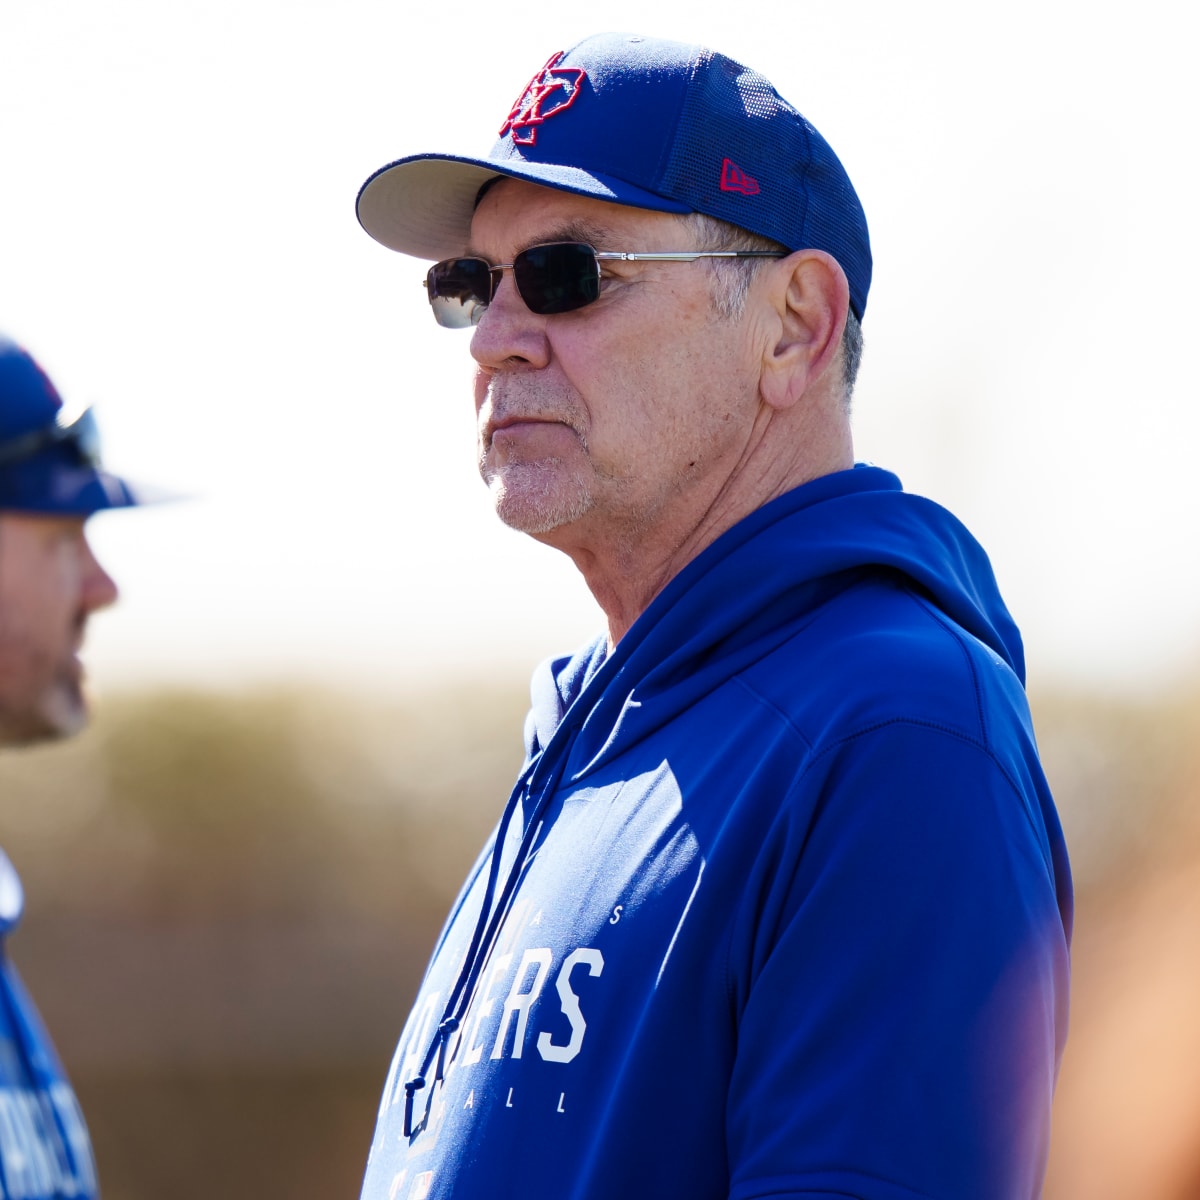 Rangers manager Bruce Bochy pleased with progress by ace Max